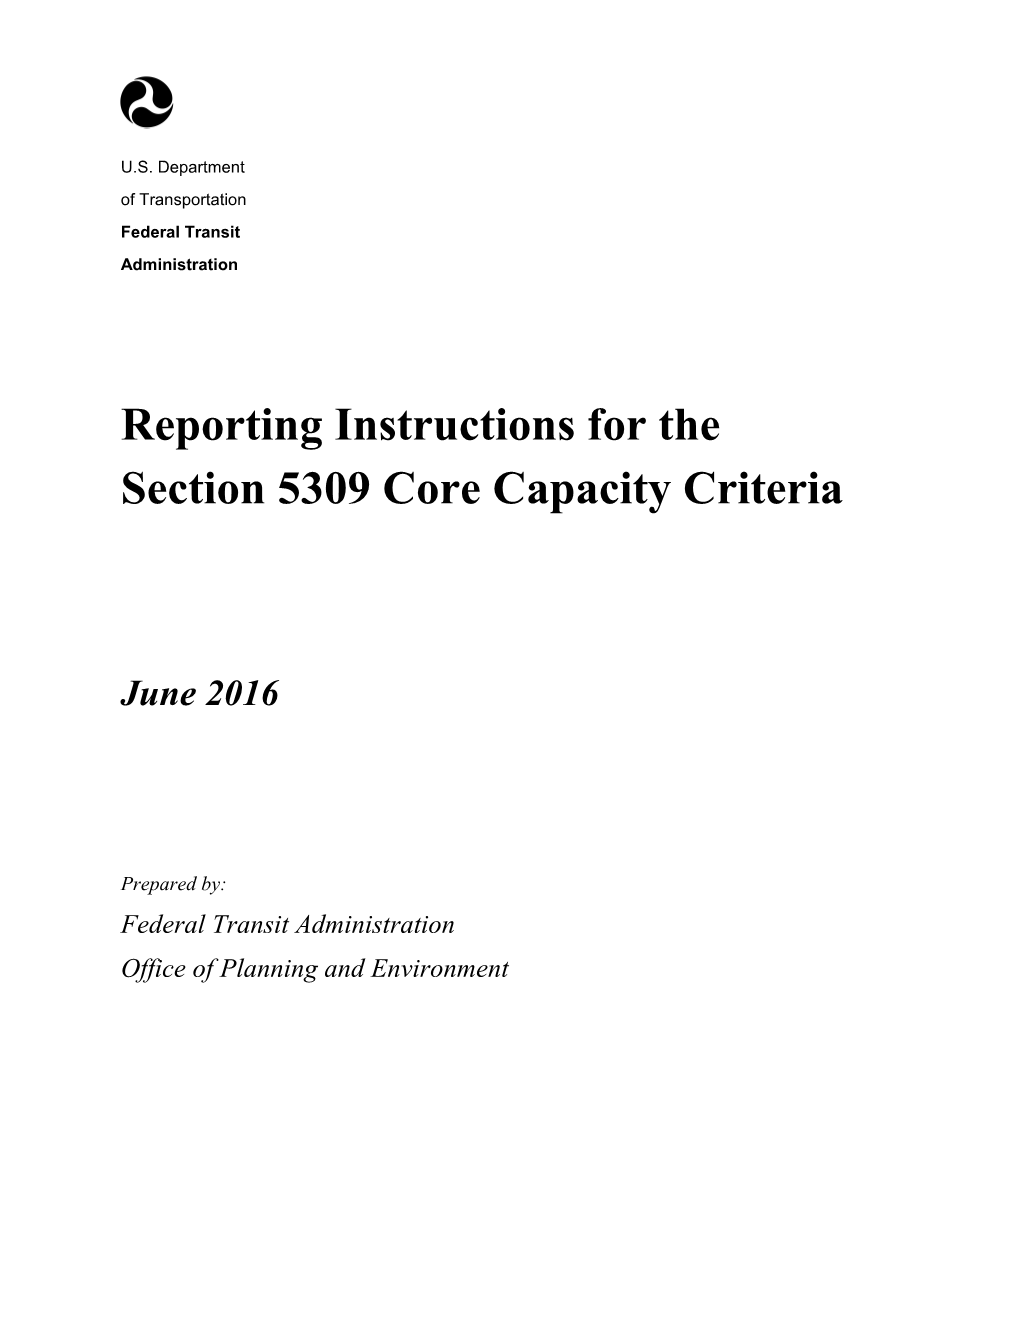 Reporting Instructions for the Section 5309 New Starts Criteria